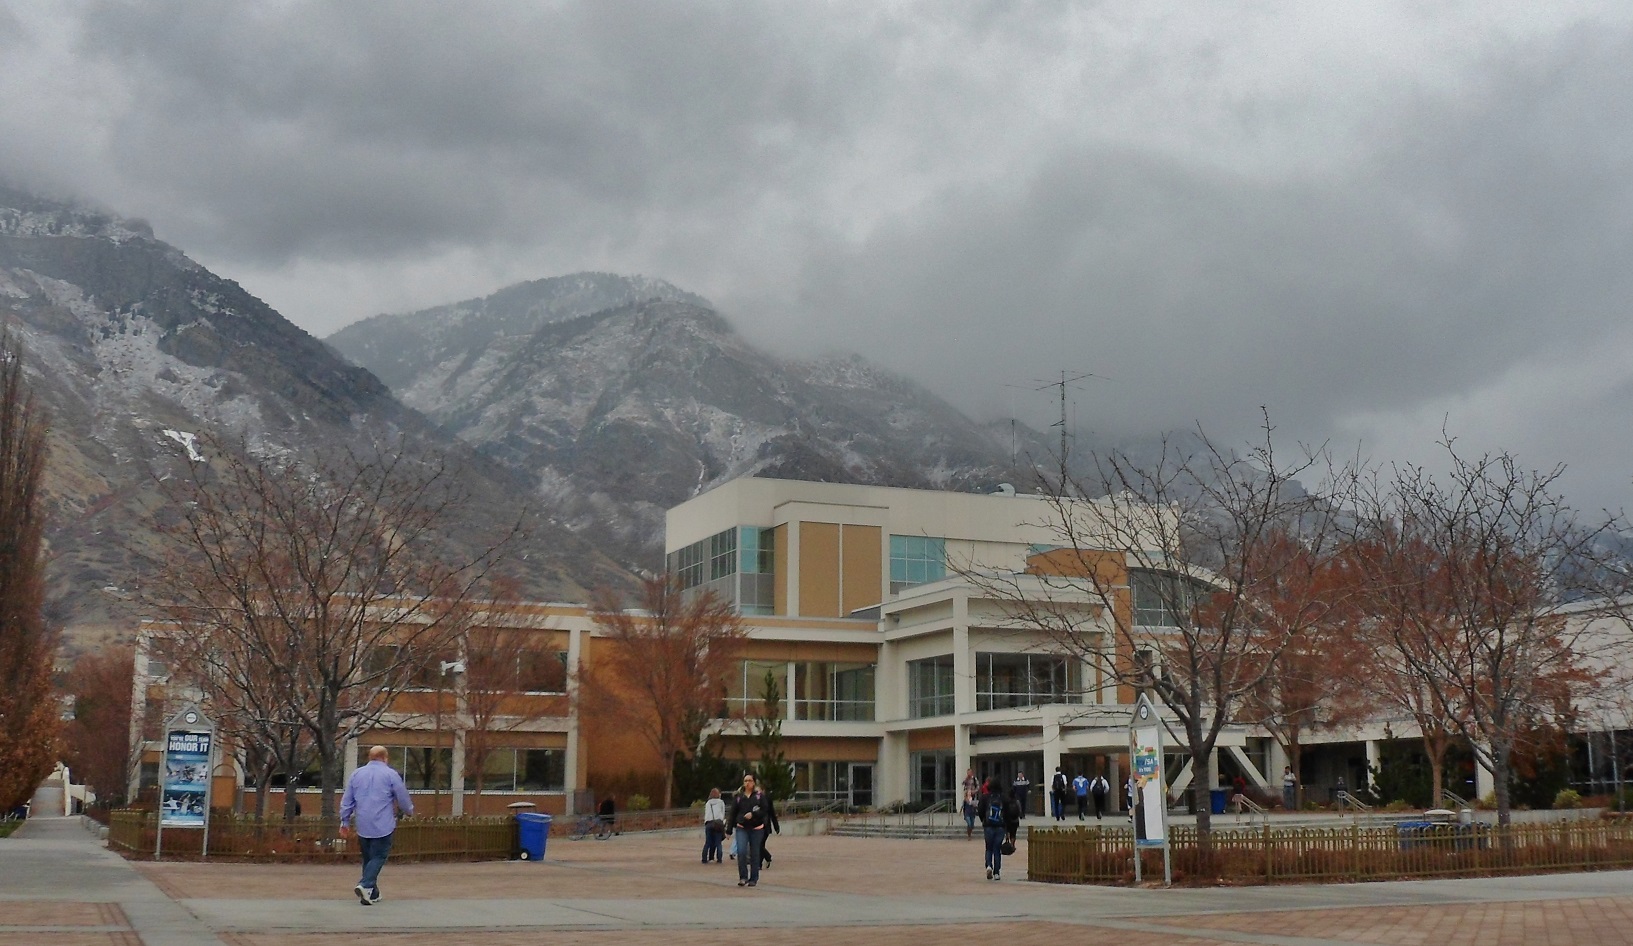 Seven more weird things from BYU’s bookstore